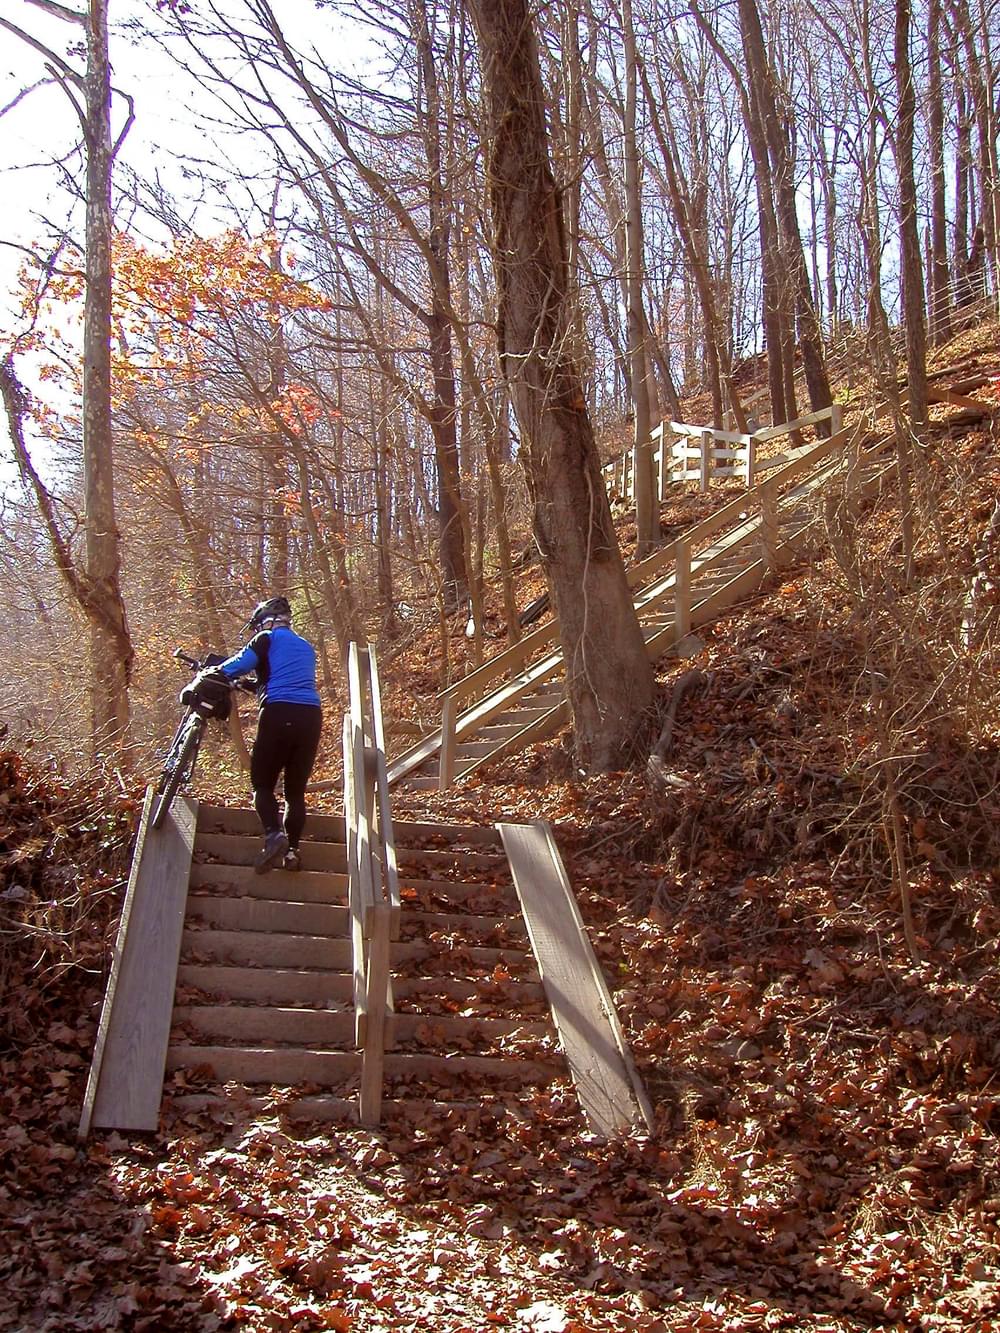 Stairs up Bow Ridge where the West Penn Trail passes over Conemaugh Lake. The tunnel that carried the railroad is now plugged, so bicyclists must climb over the ridge. These stairs make the climb easier.